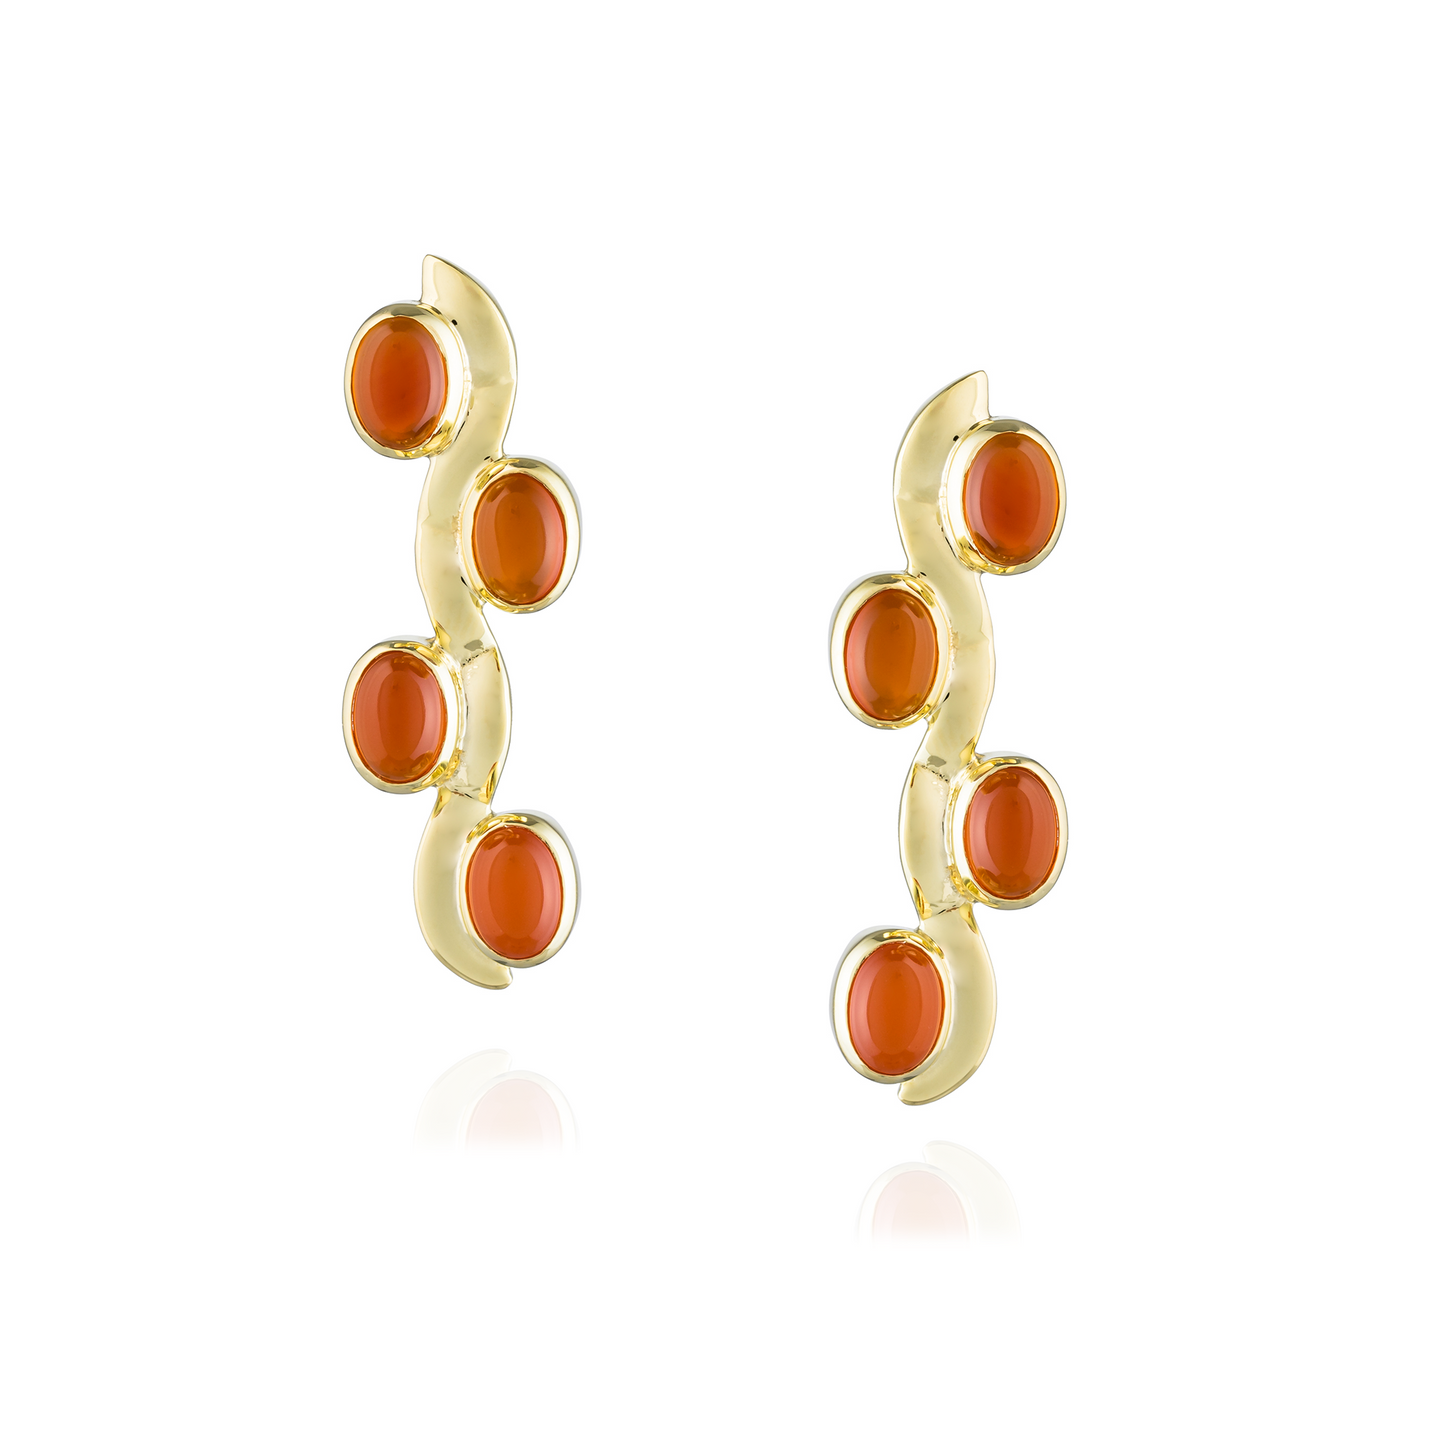 Caramelo 925 Silver Earrings plated in 18k Yellow Gold with Carnelian